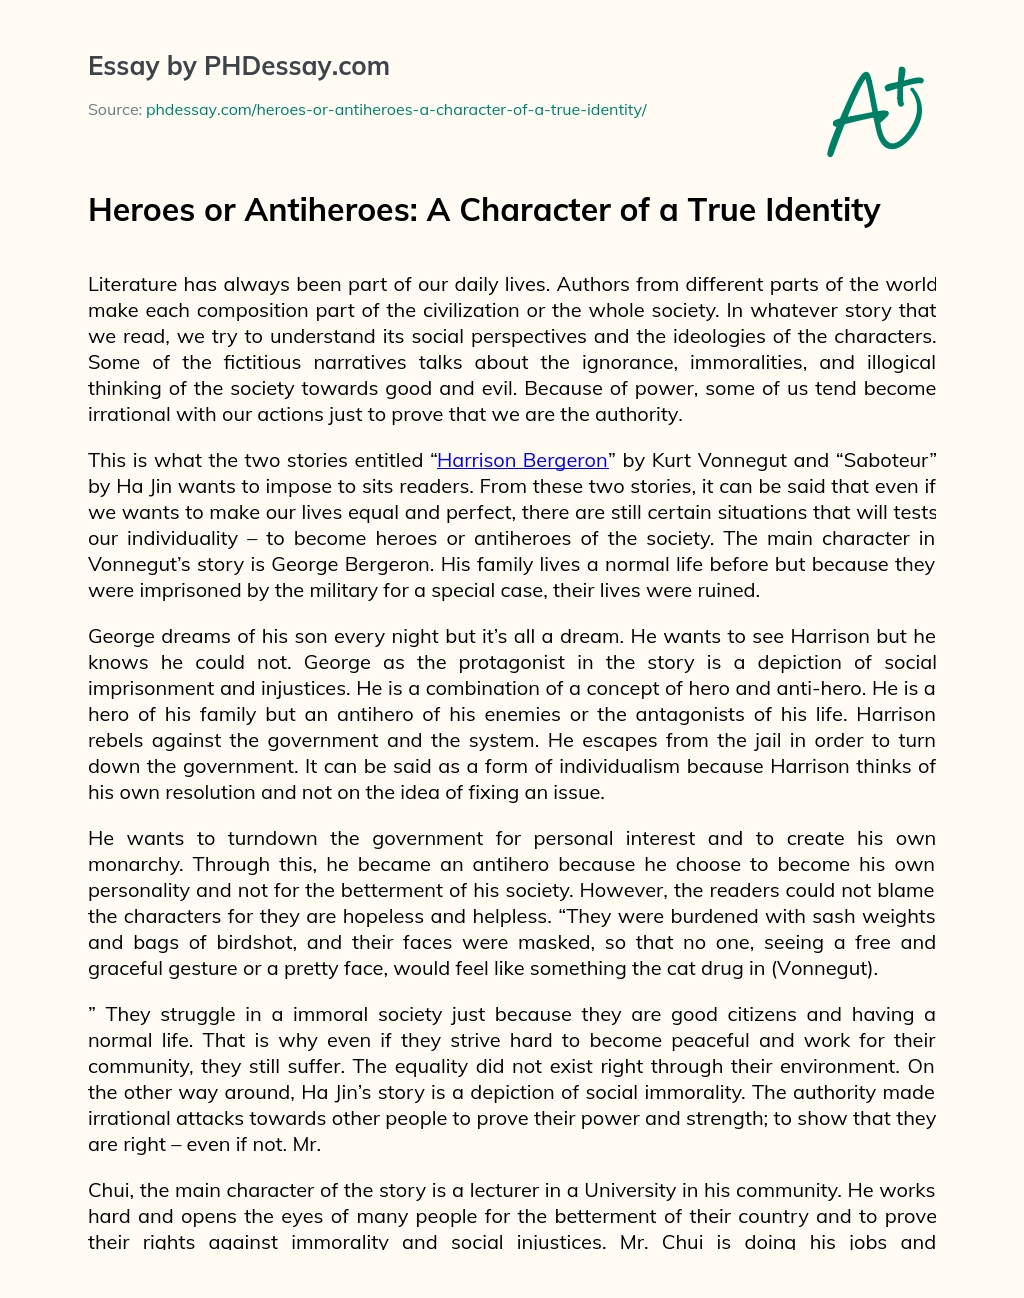 Heroes or Antiheroes: A Character of a True Identity essay